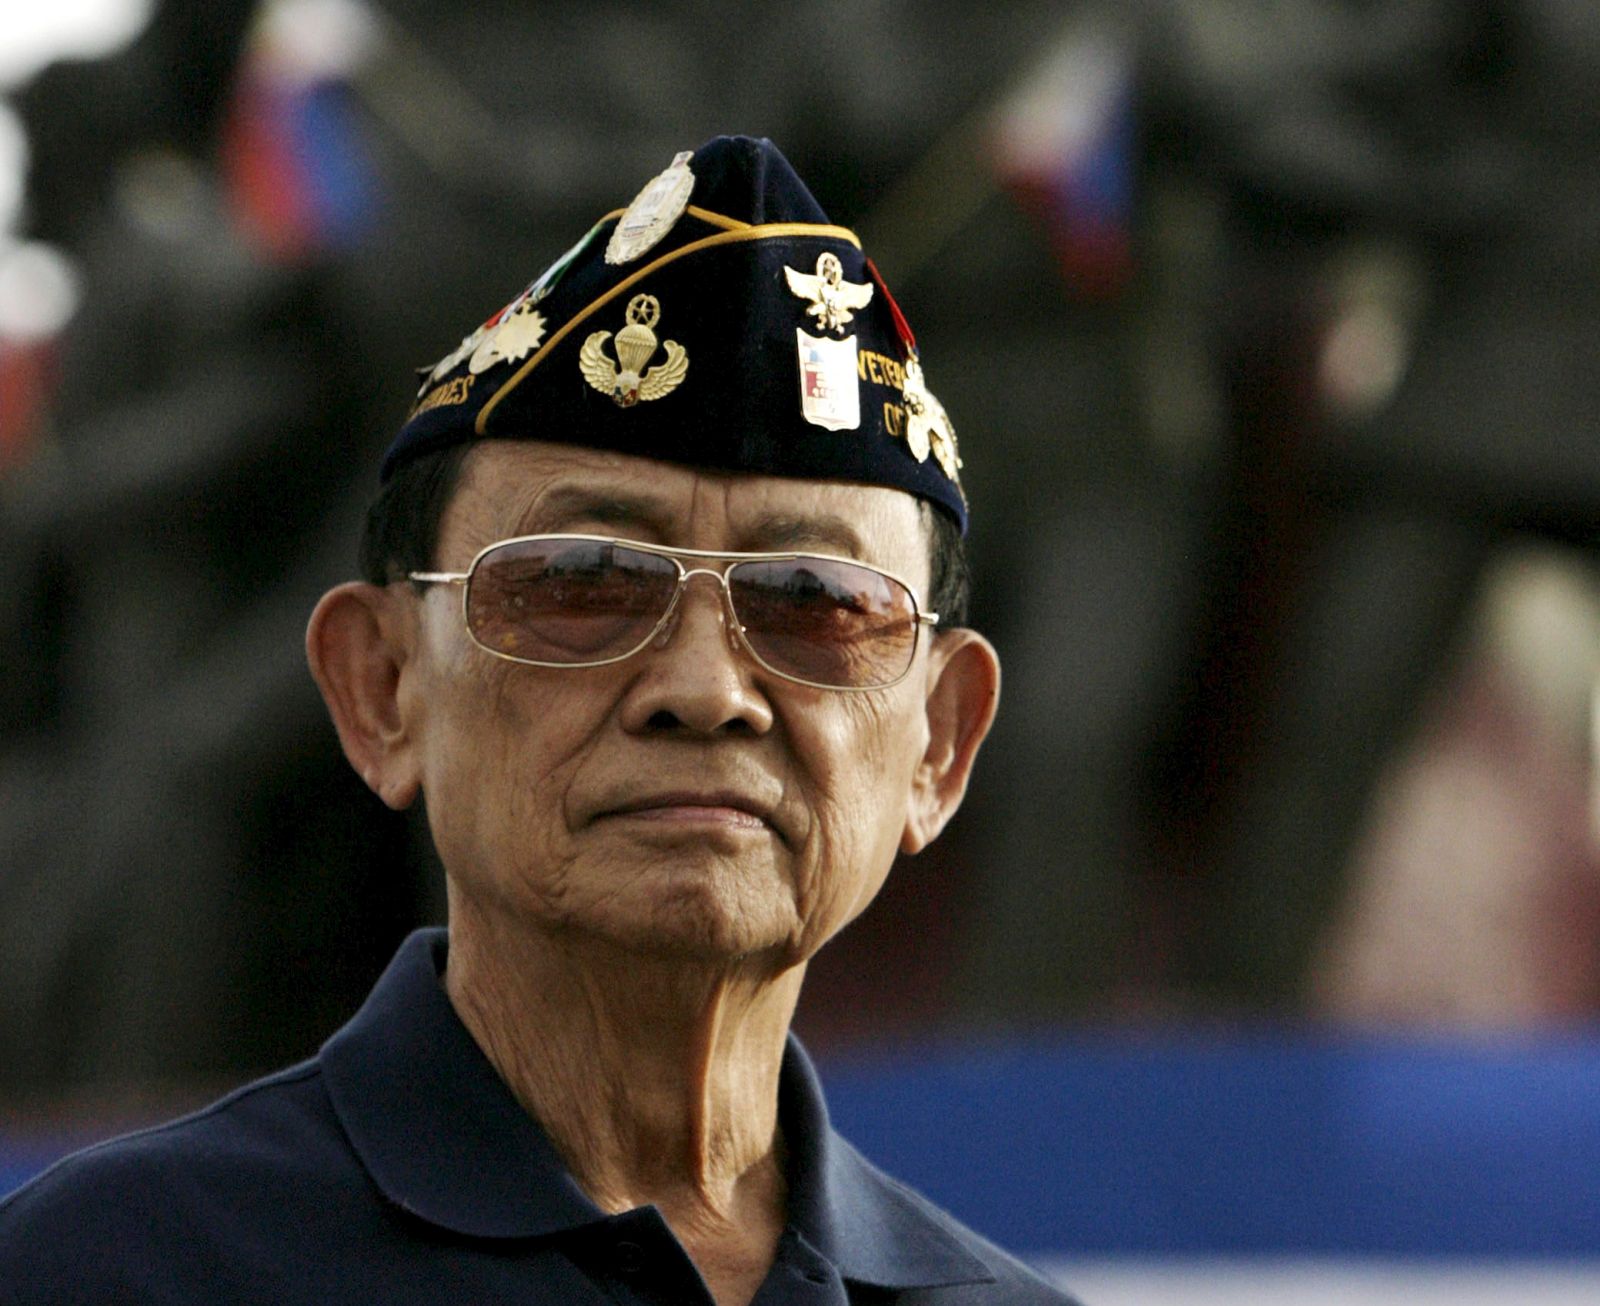 epa10099715 (FILE) - Former Philippines President Fidel Ramos is seen during 'People Power revolution' anniversary at Epifanio Delos Santos Avenue in Quezon City, east of Manila, Philippines, 25 February 2009 (reissued 31 July 2022). Fidel Ramos died at the age of 94, President Marcos Jr.'s press secretary Cruz-Angeles confirmed on 31 July 2022.  EPA/FRANCIS R. MALASIG